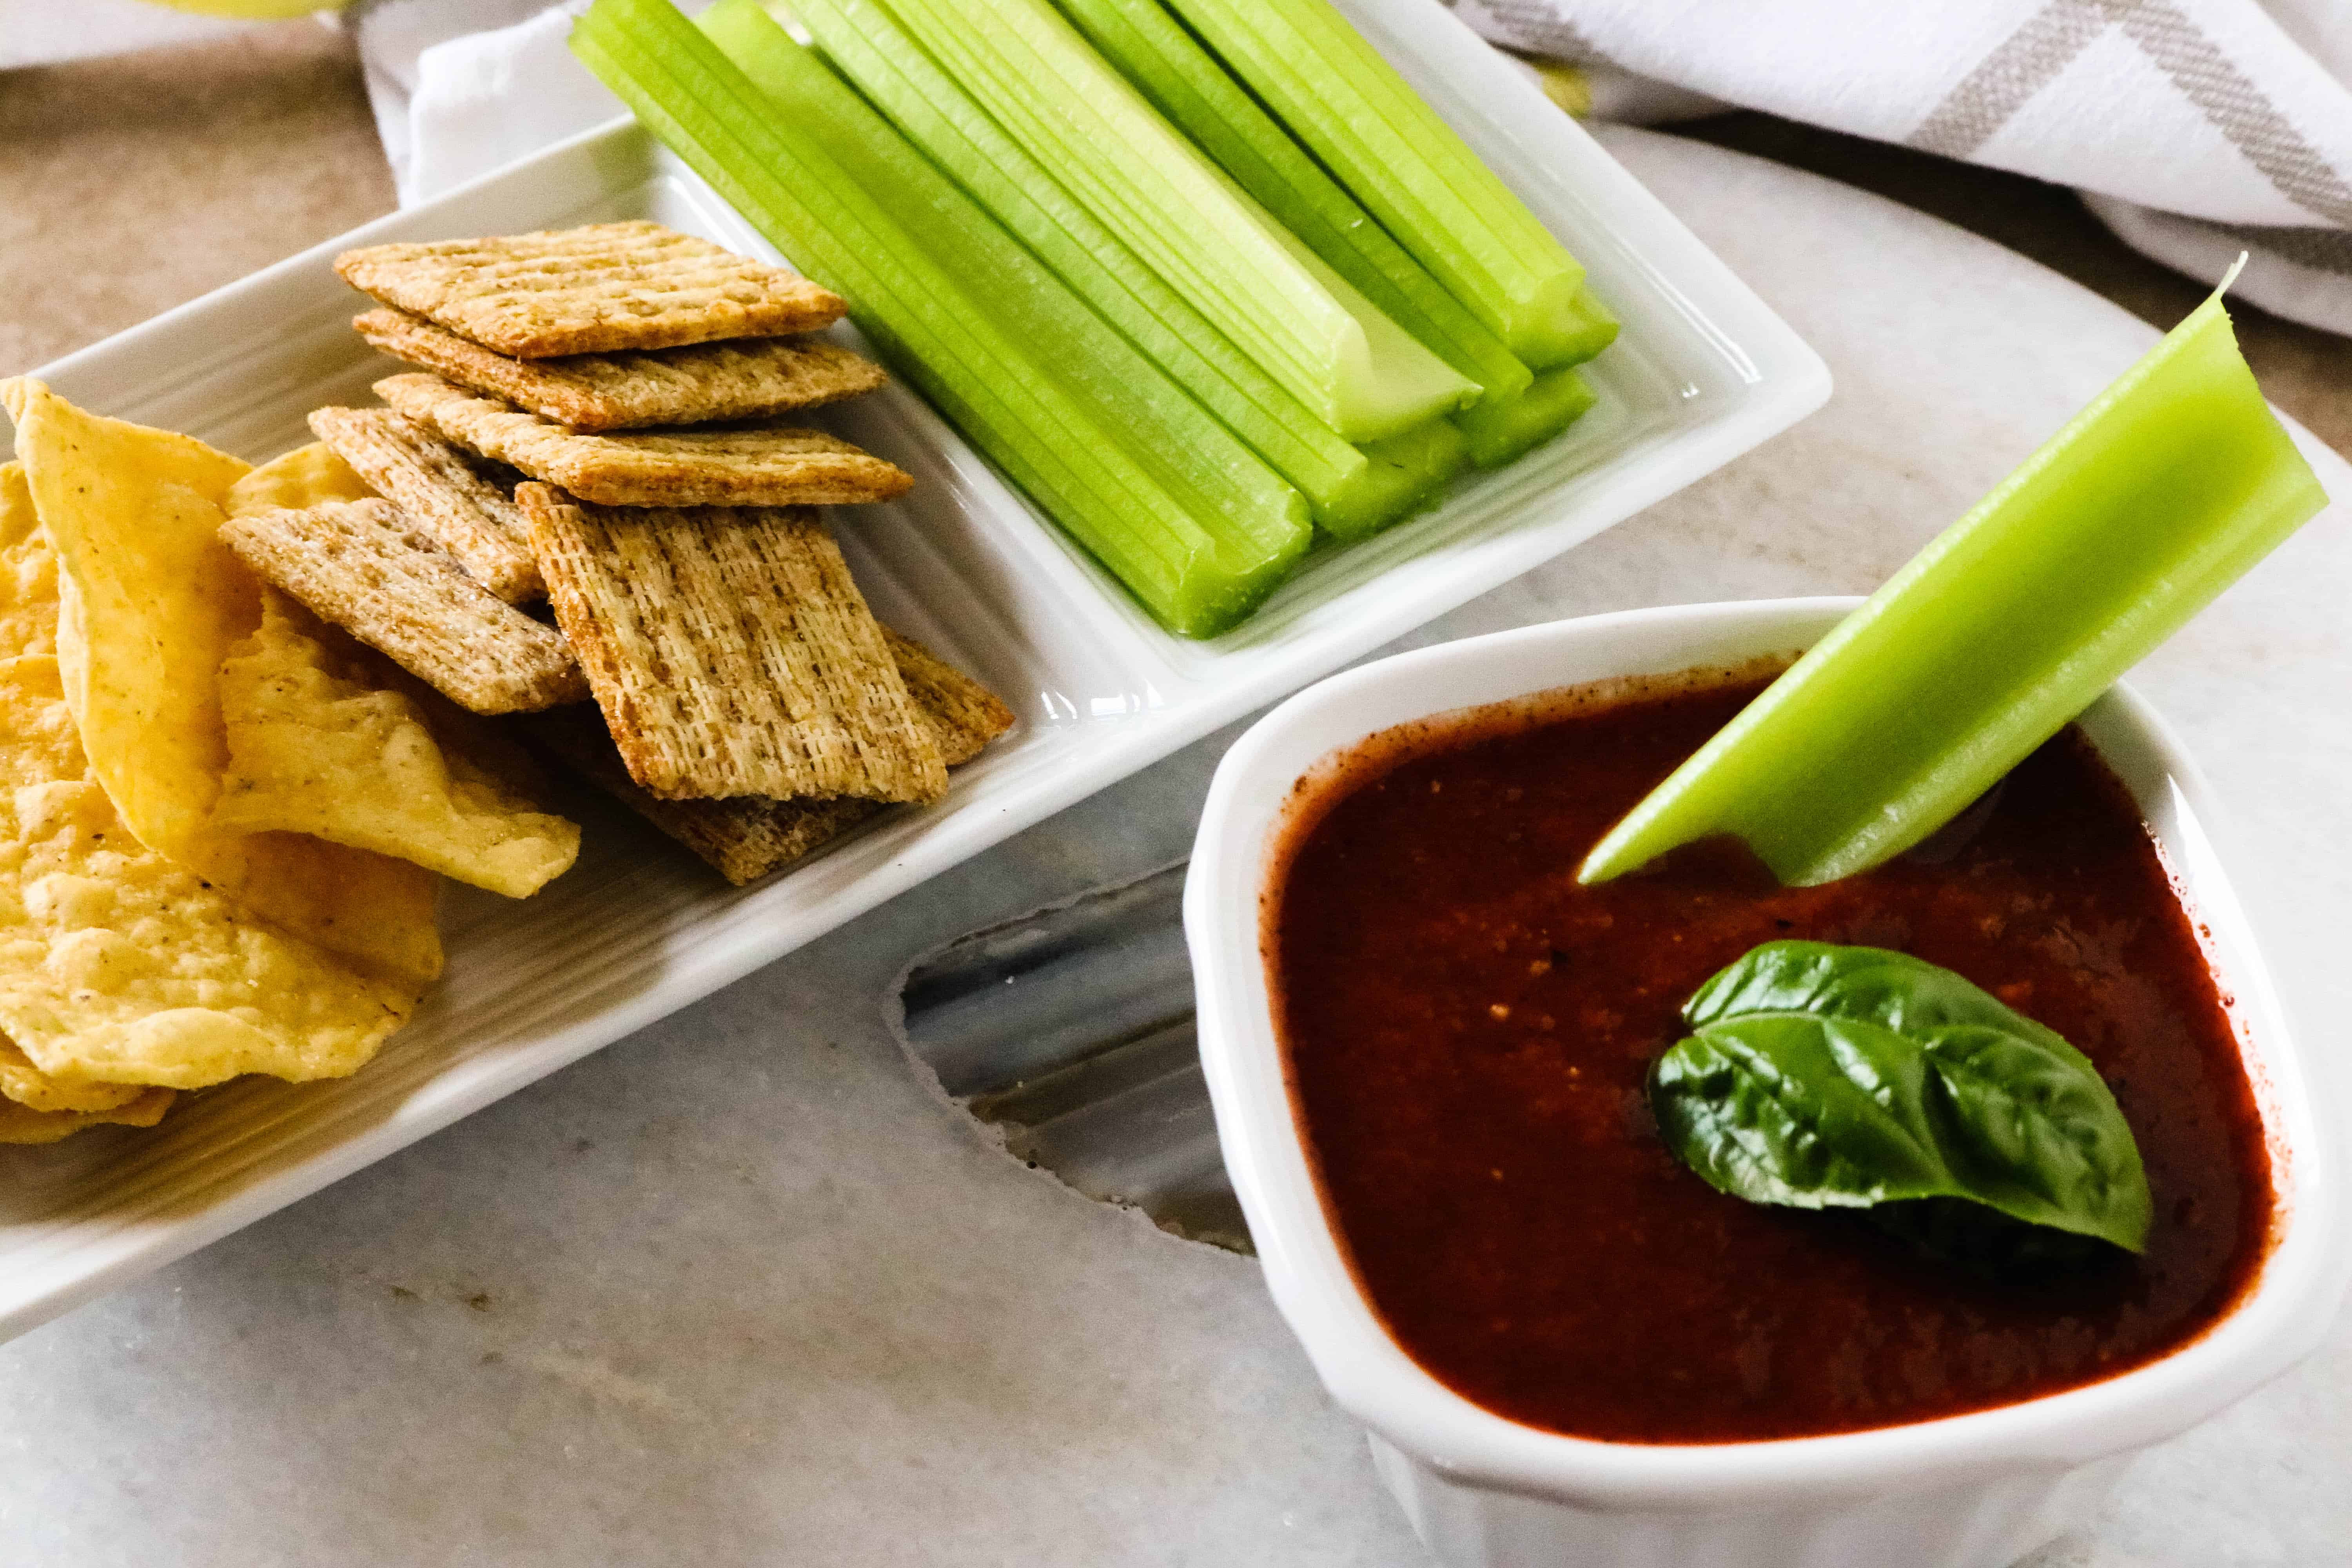 rectangular white plate with celery, triscuit crackers and tortillas in background and white ceramic bowl of roasted red pepper dip in foreground